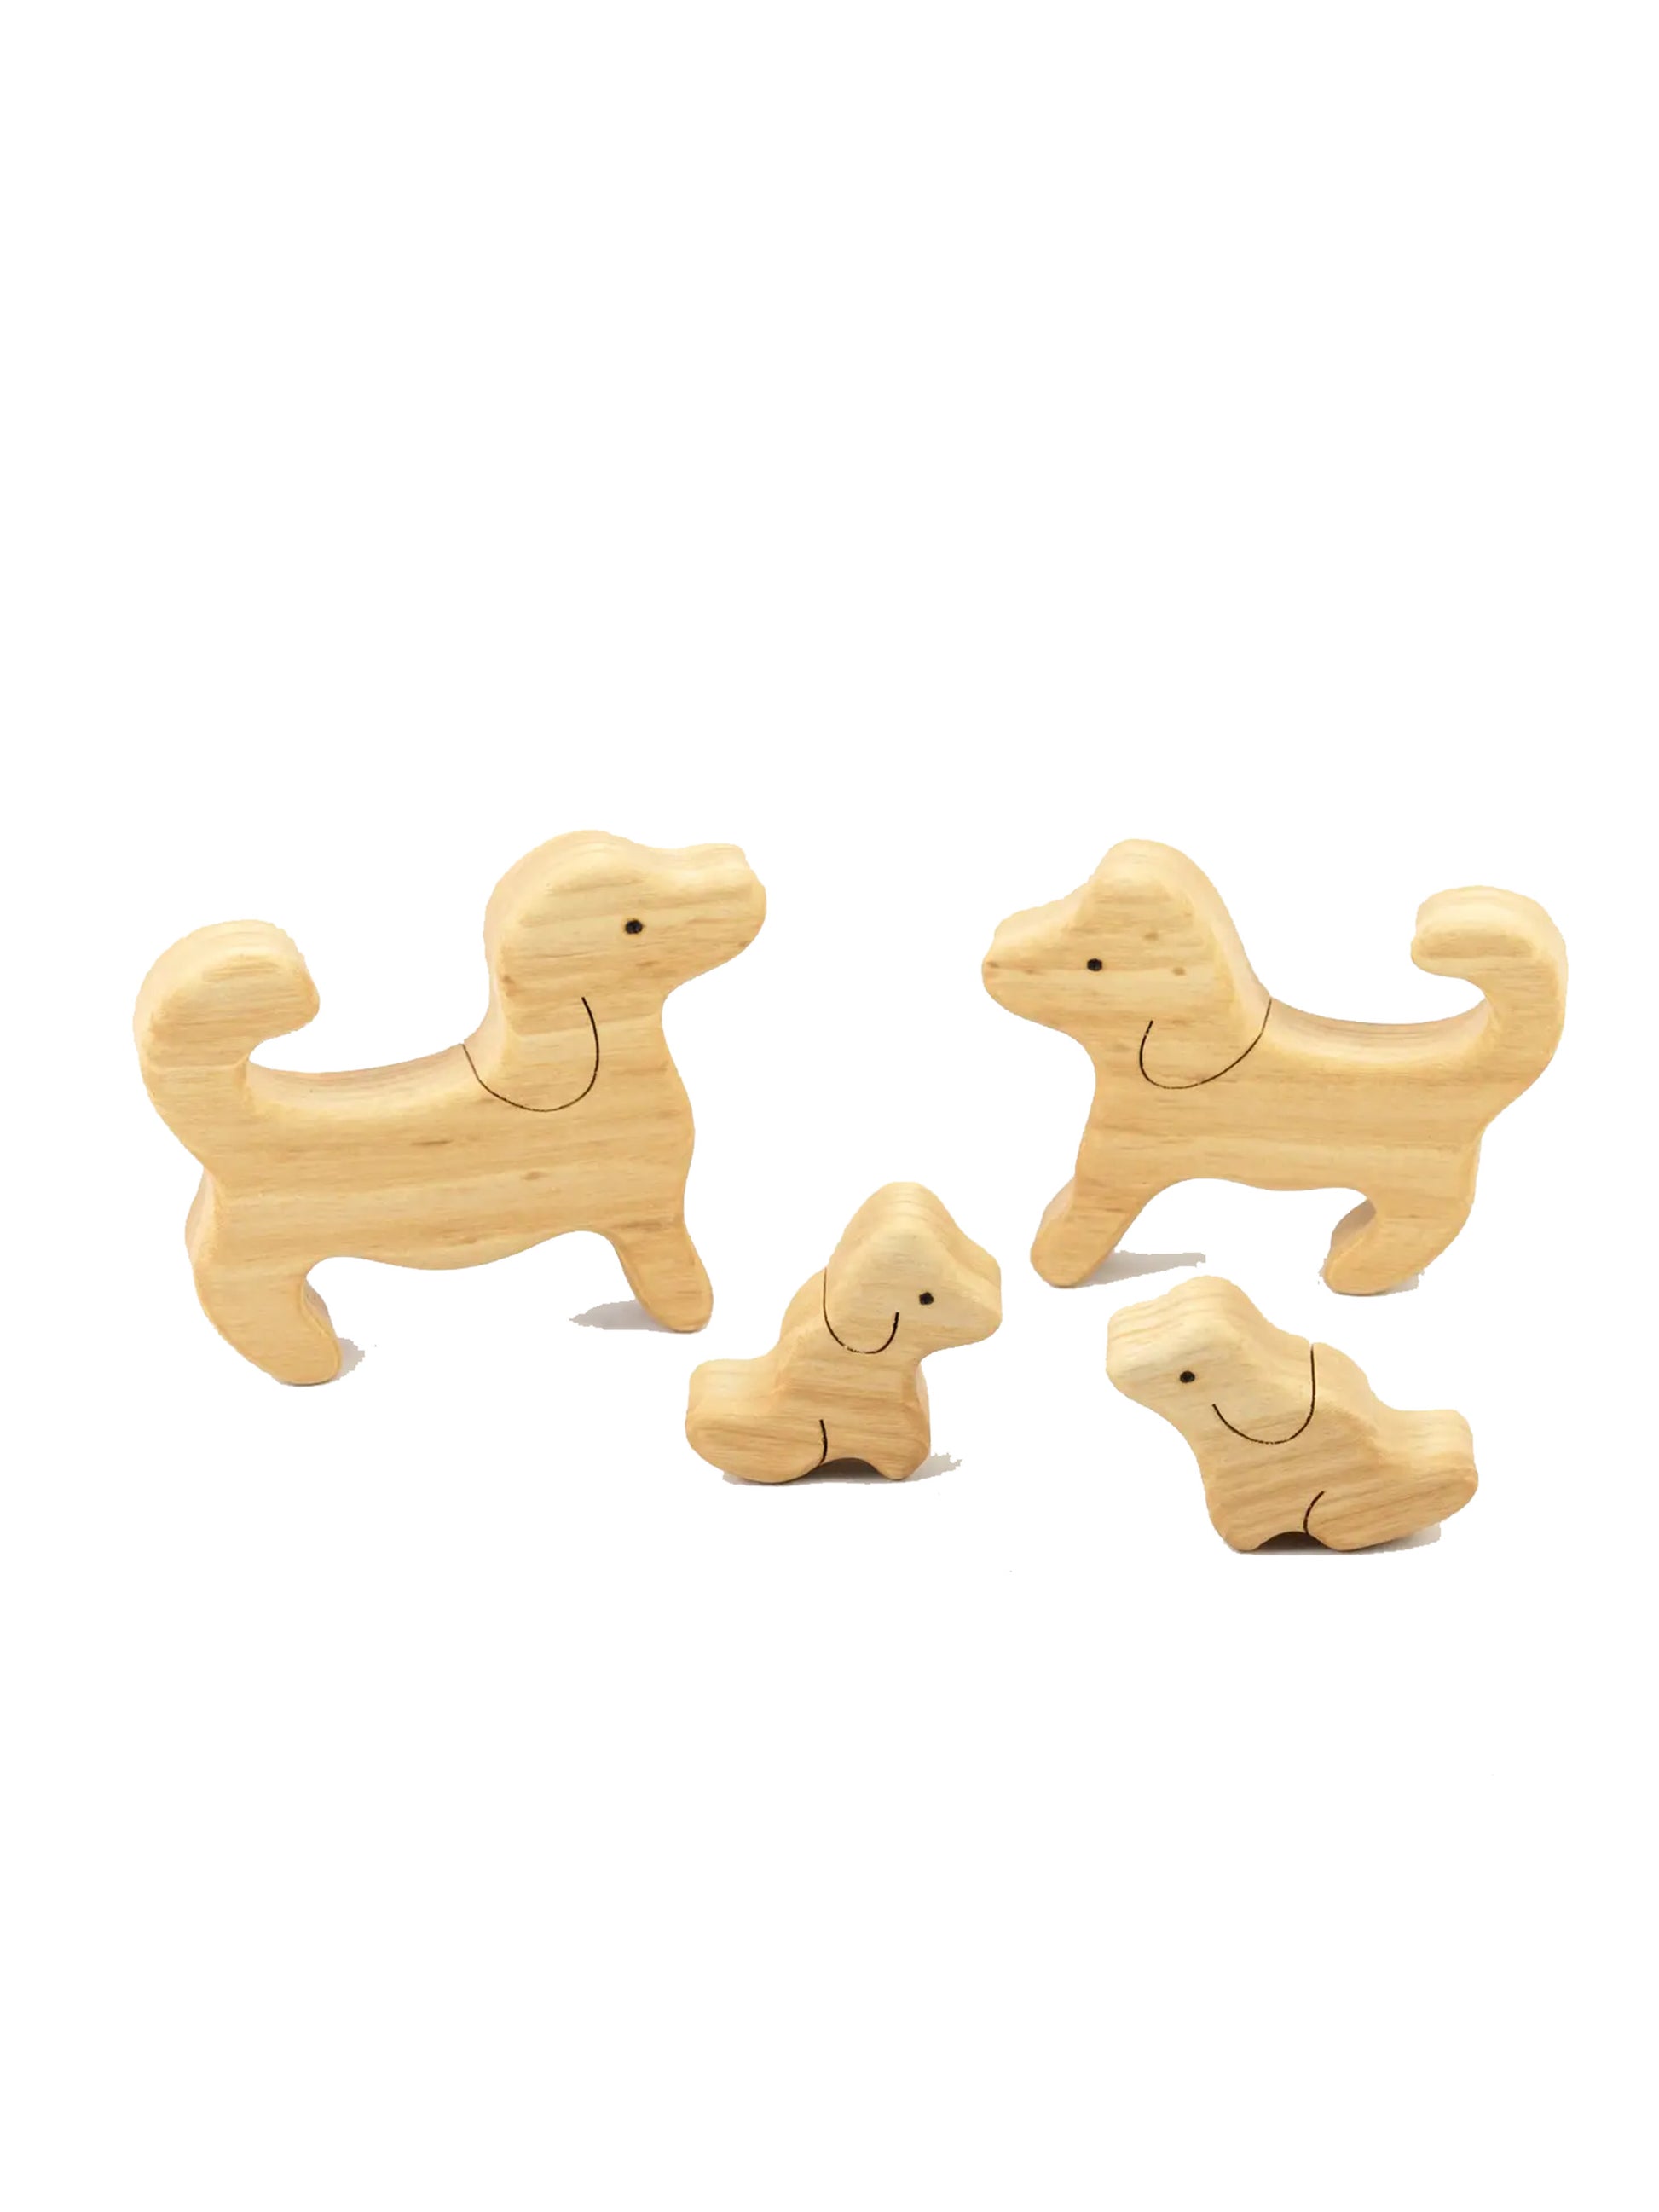 Shop the Waldorf Wooden Dogs Puzzle Set at Weston Table